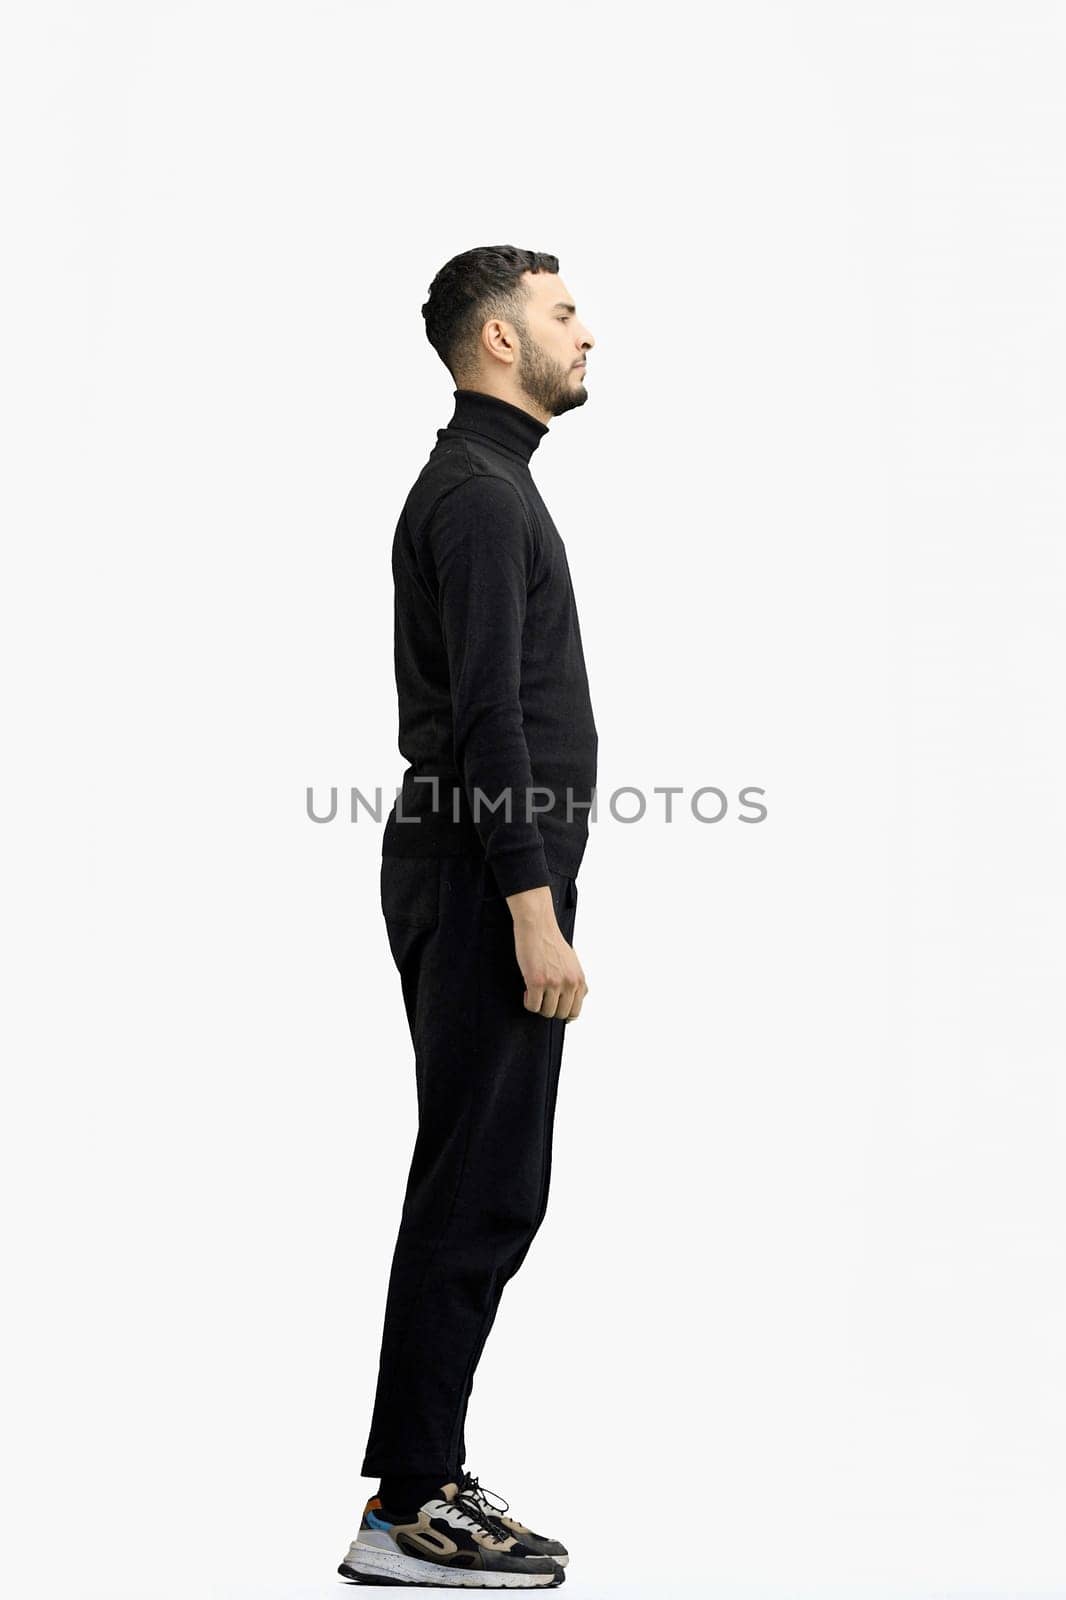 A man, full-length, on a white background.